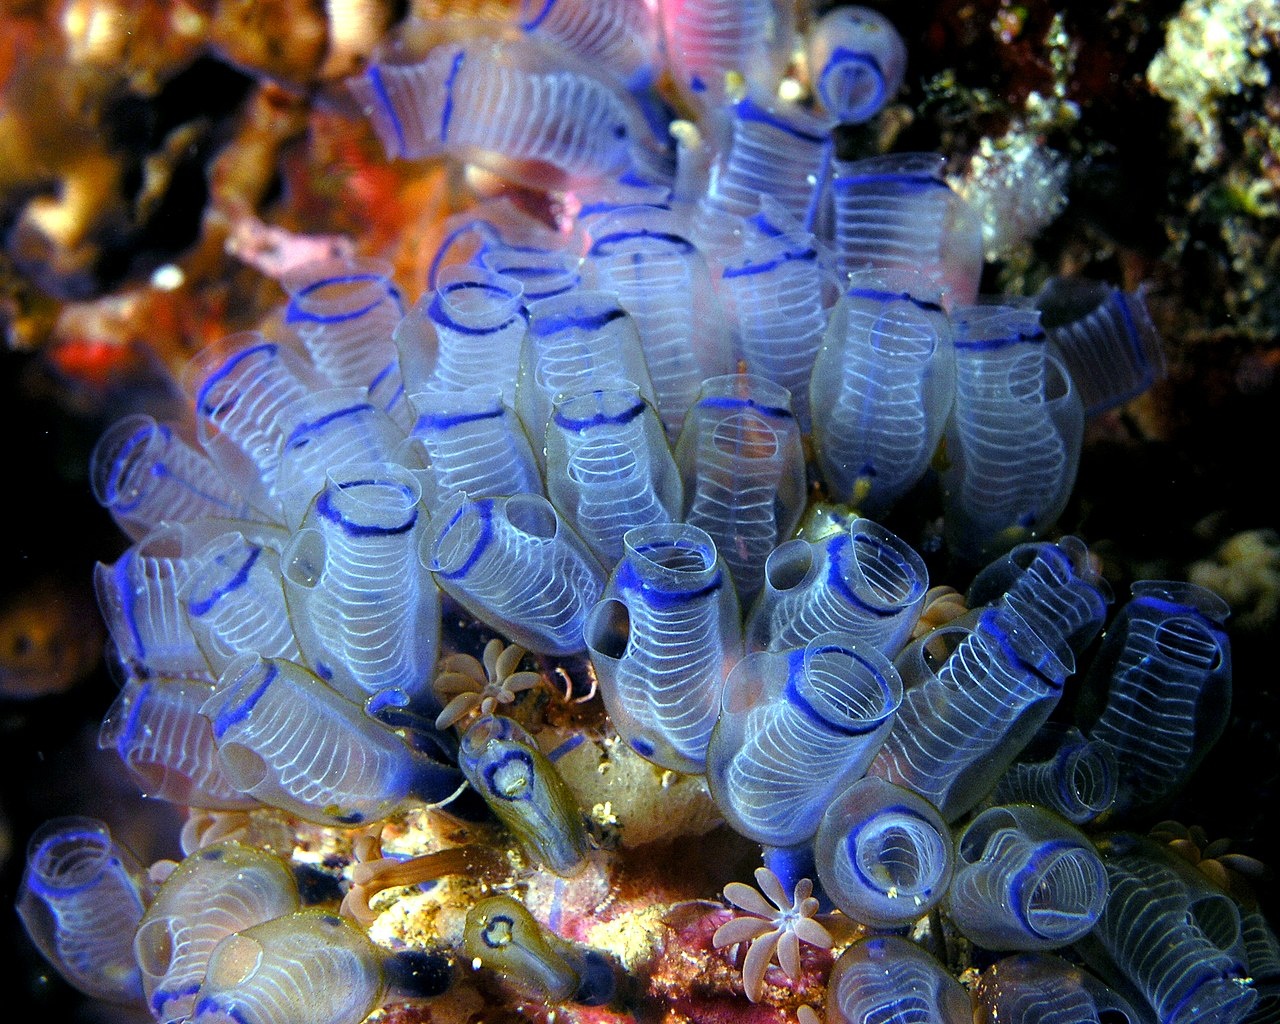 Claveline bleue tropicale - Clavelina moluccensis - <a href='https://commons.wikimedia.org/wiki/File:Bluebell_tunicates_Nick_Hobgood.jpg' title='via Wikimedia Commons'>Nhobgood</a> / <a href='https://creativecommons.org/licenses/by-sa/3.0'>CC BY-SA</a> - BioObs